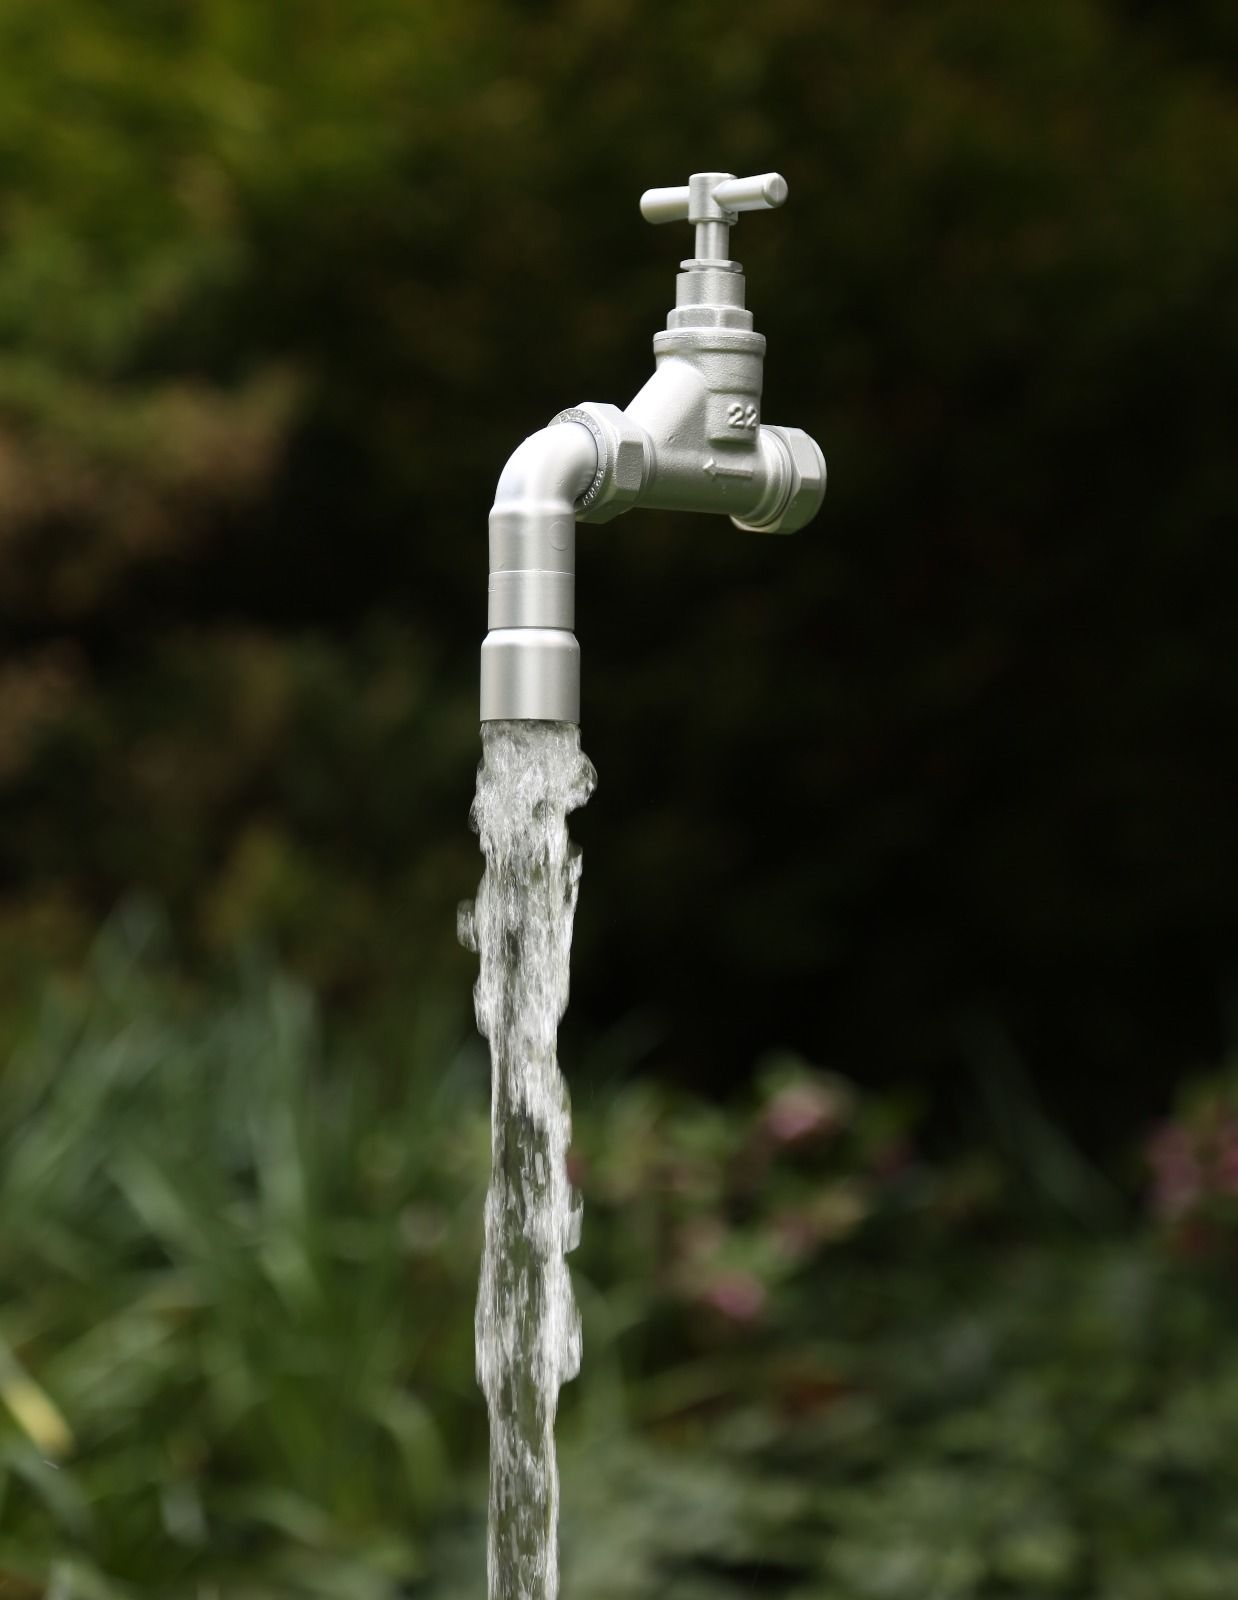 22mm Floating Tap Water Feature Including Pump (container not included)